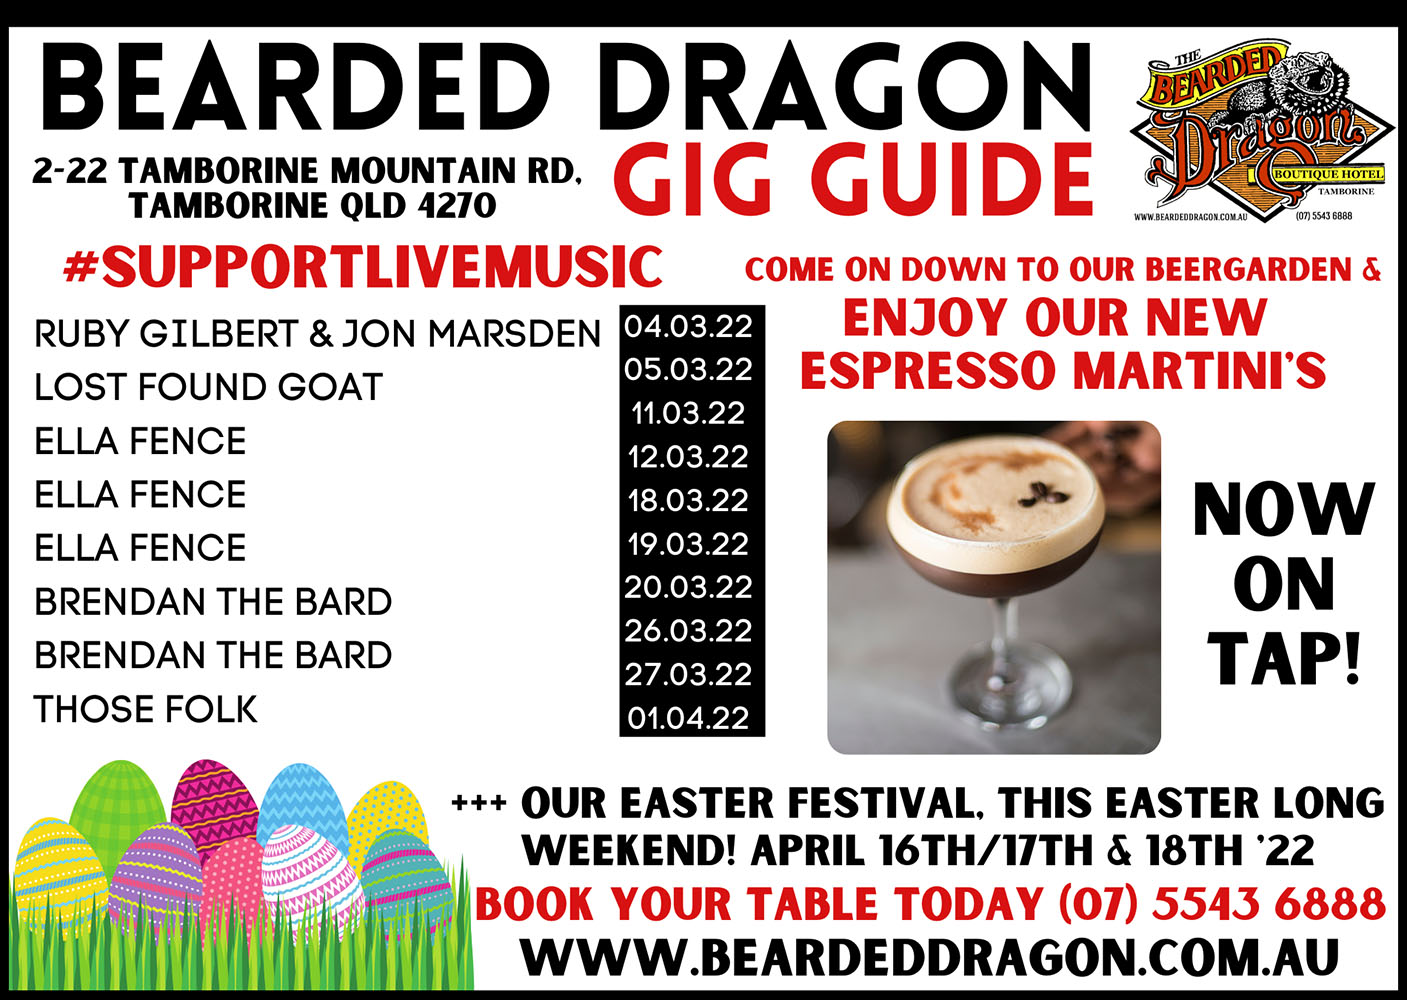 Bearded Dragon Gig Guide March